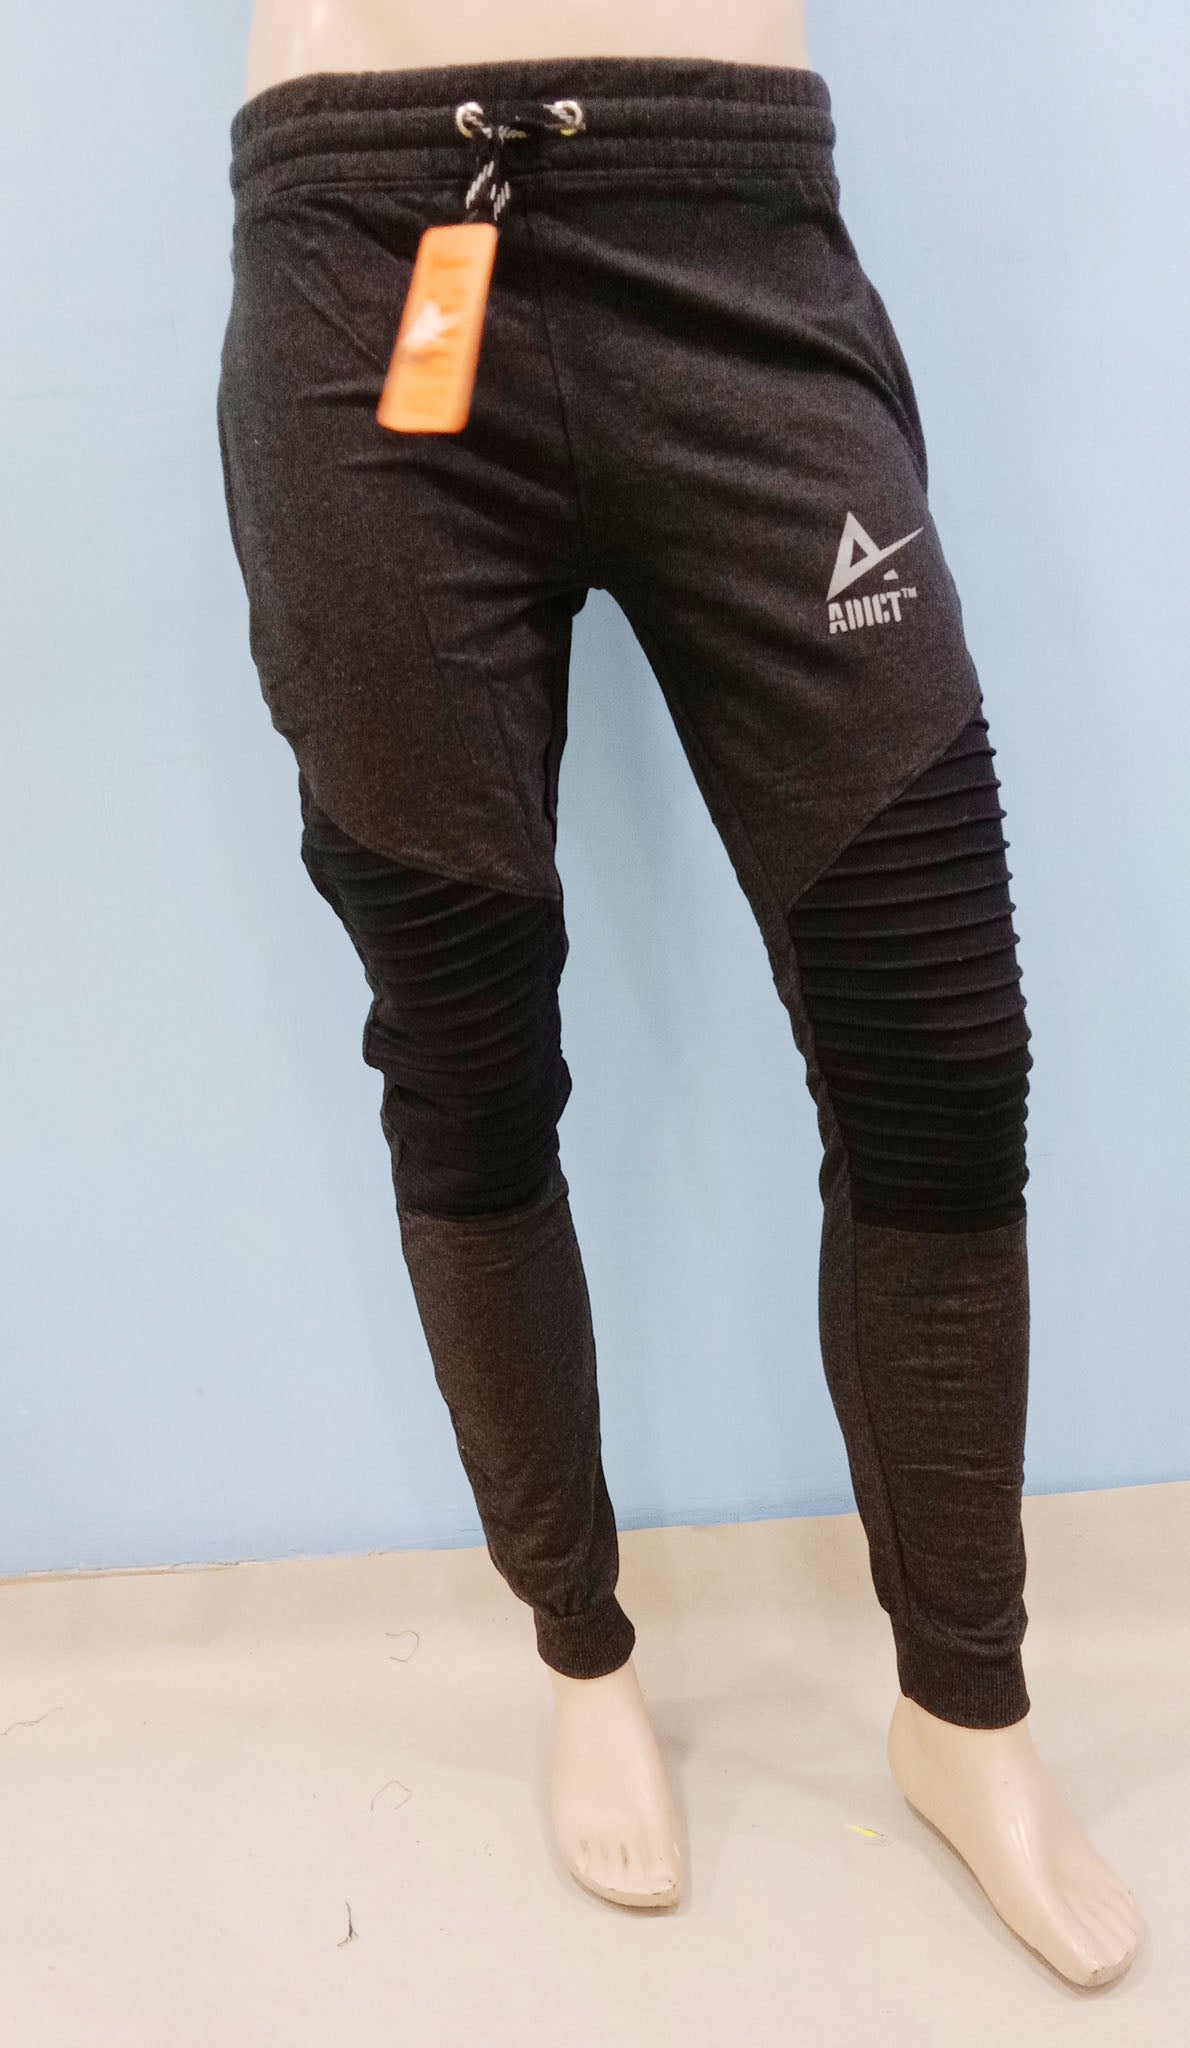 Branded Super Designed Night Pant/Track Suit Jogger Model for men L to 2XL sizes 5 Designs PS11 - Faritha